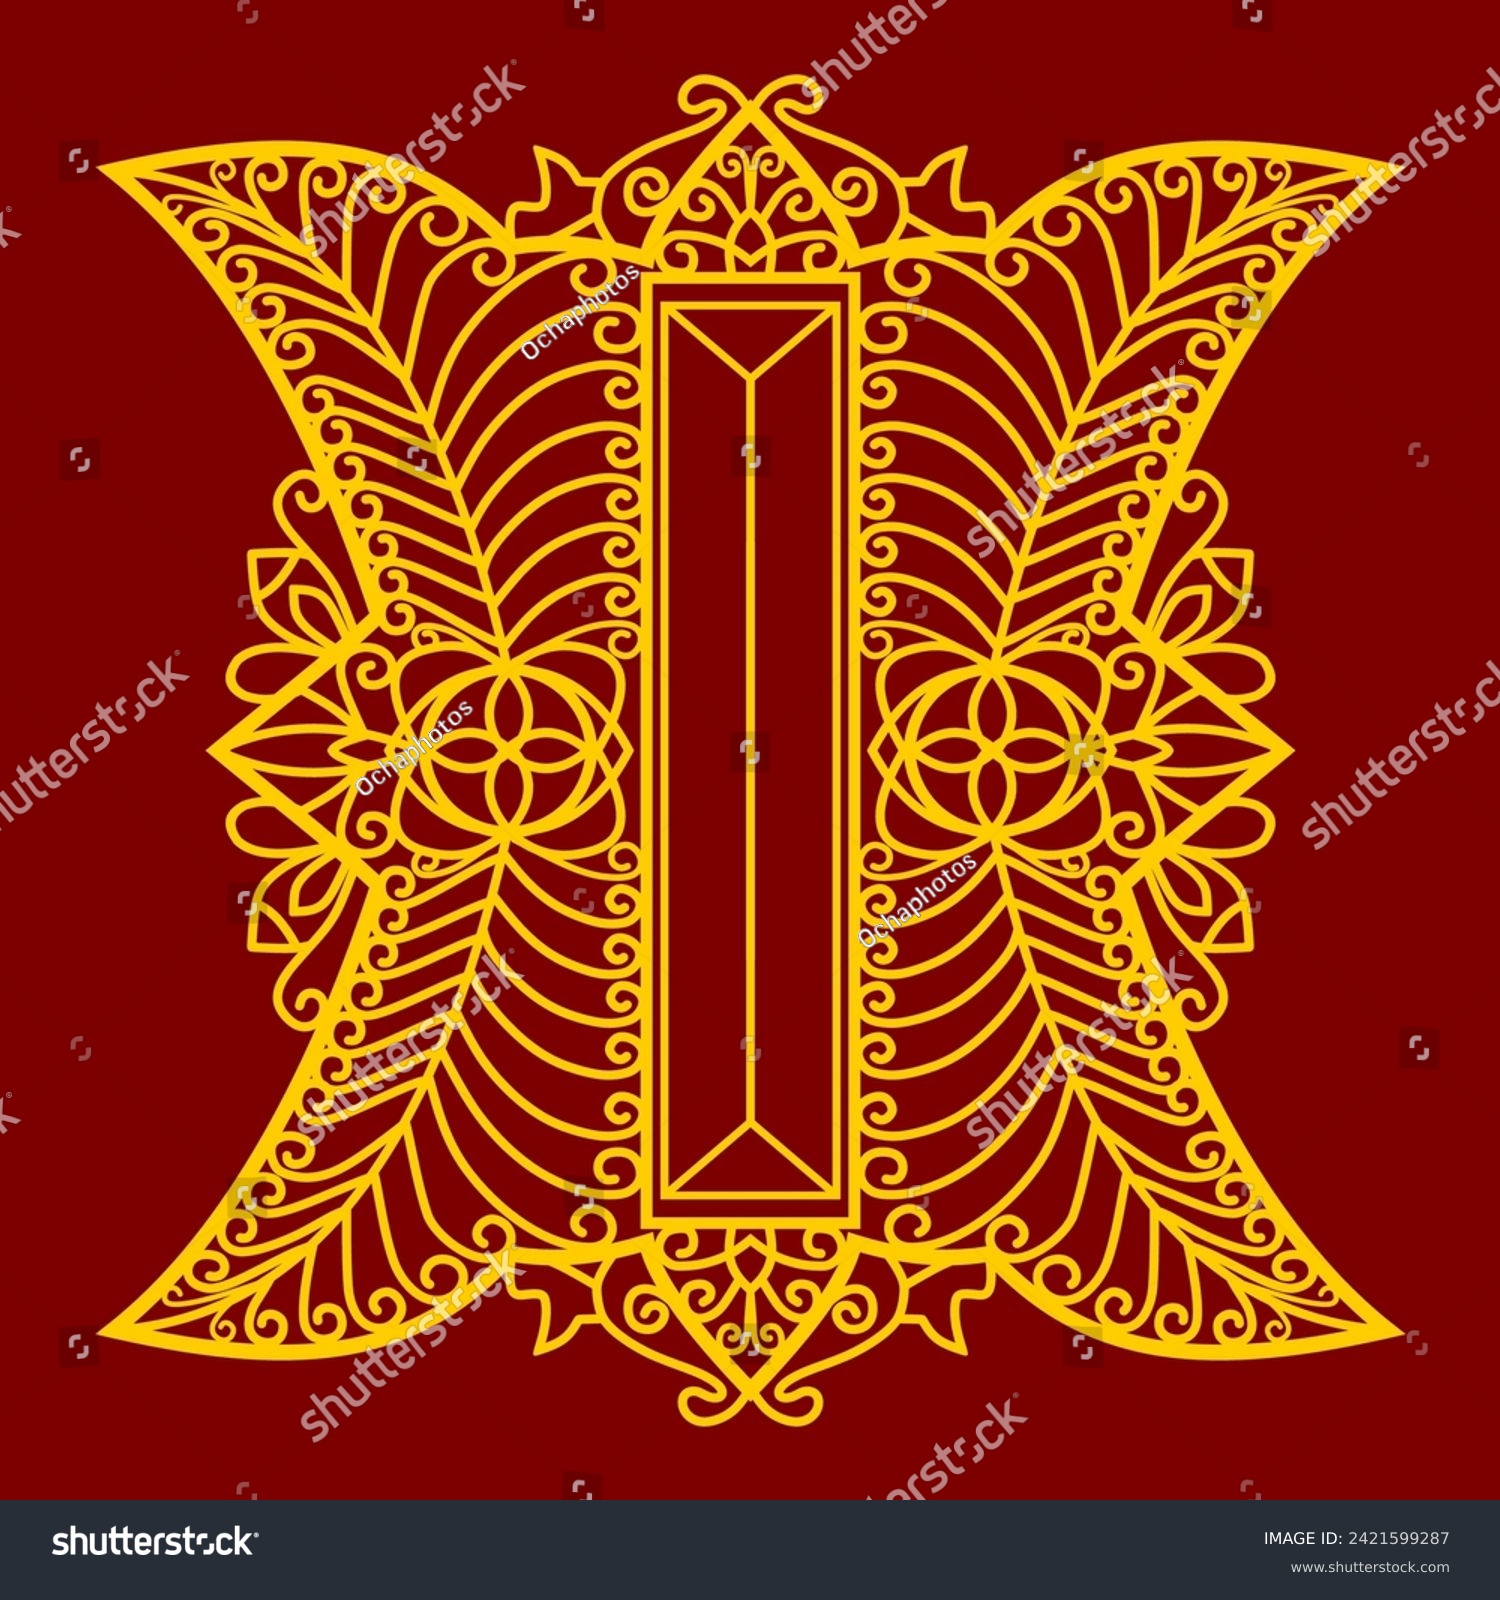 SVG of Pinto Aceh, Aceh's traditional ornament, symbol of Aceh's special region on dark red ackground svg